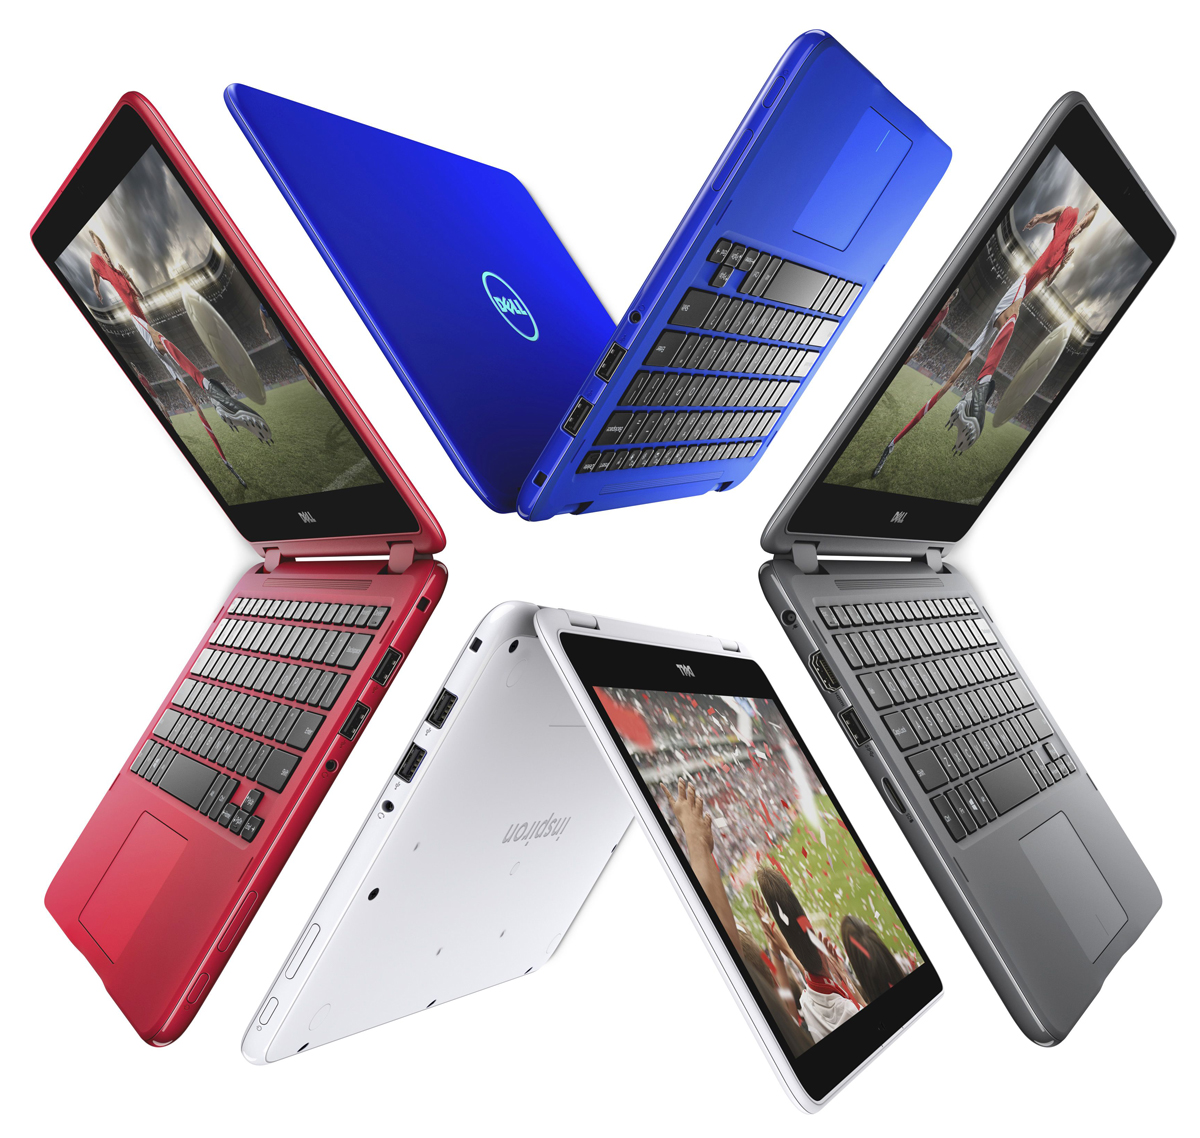 Inspiron-11-3000-2-in-1---different-angles-and-colours